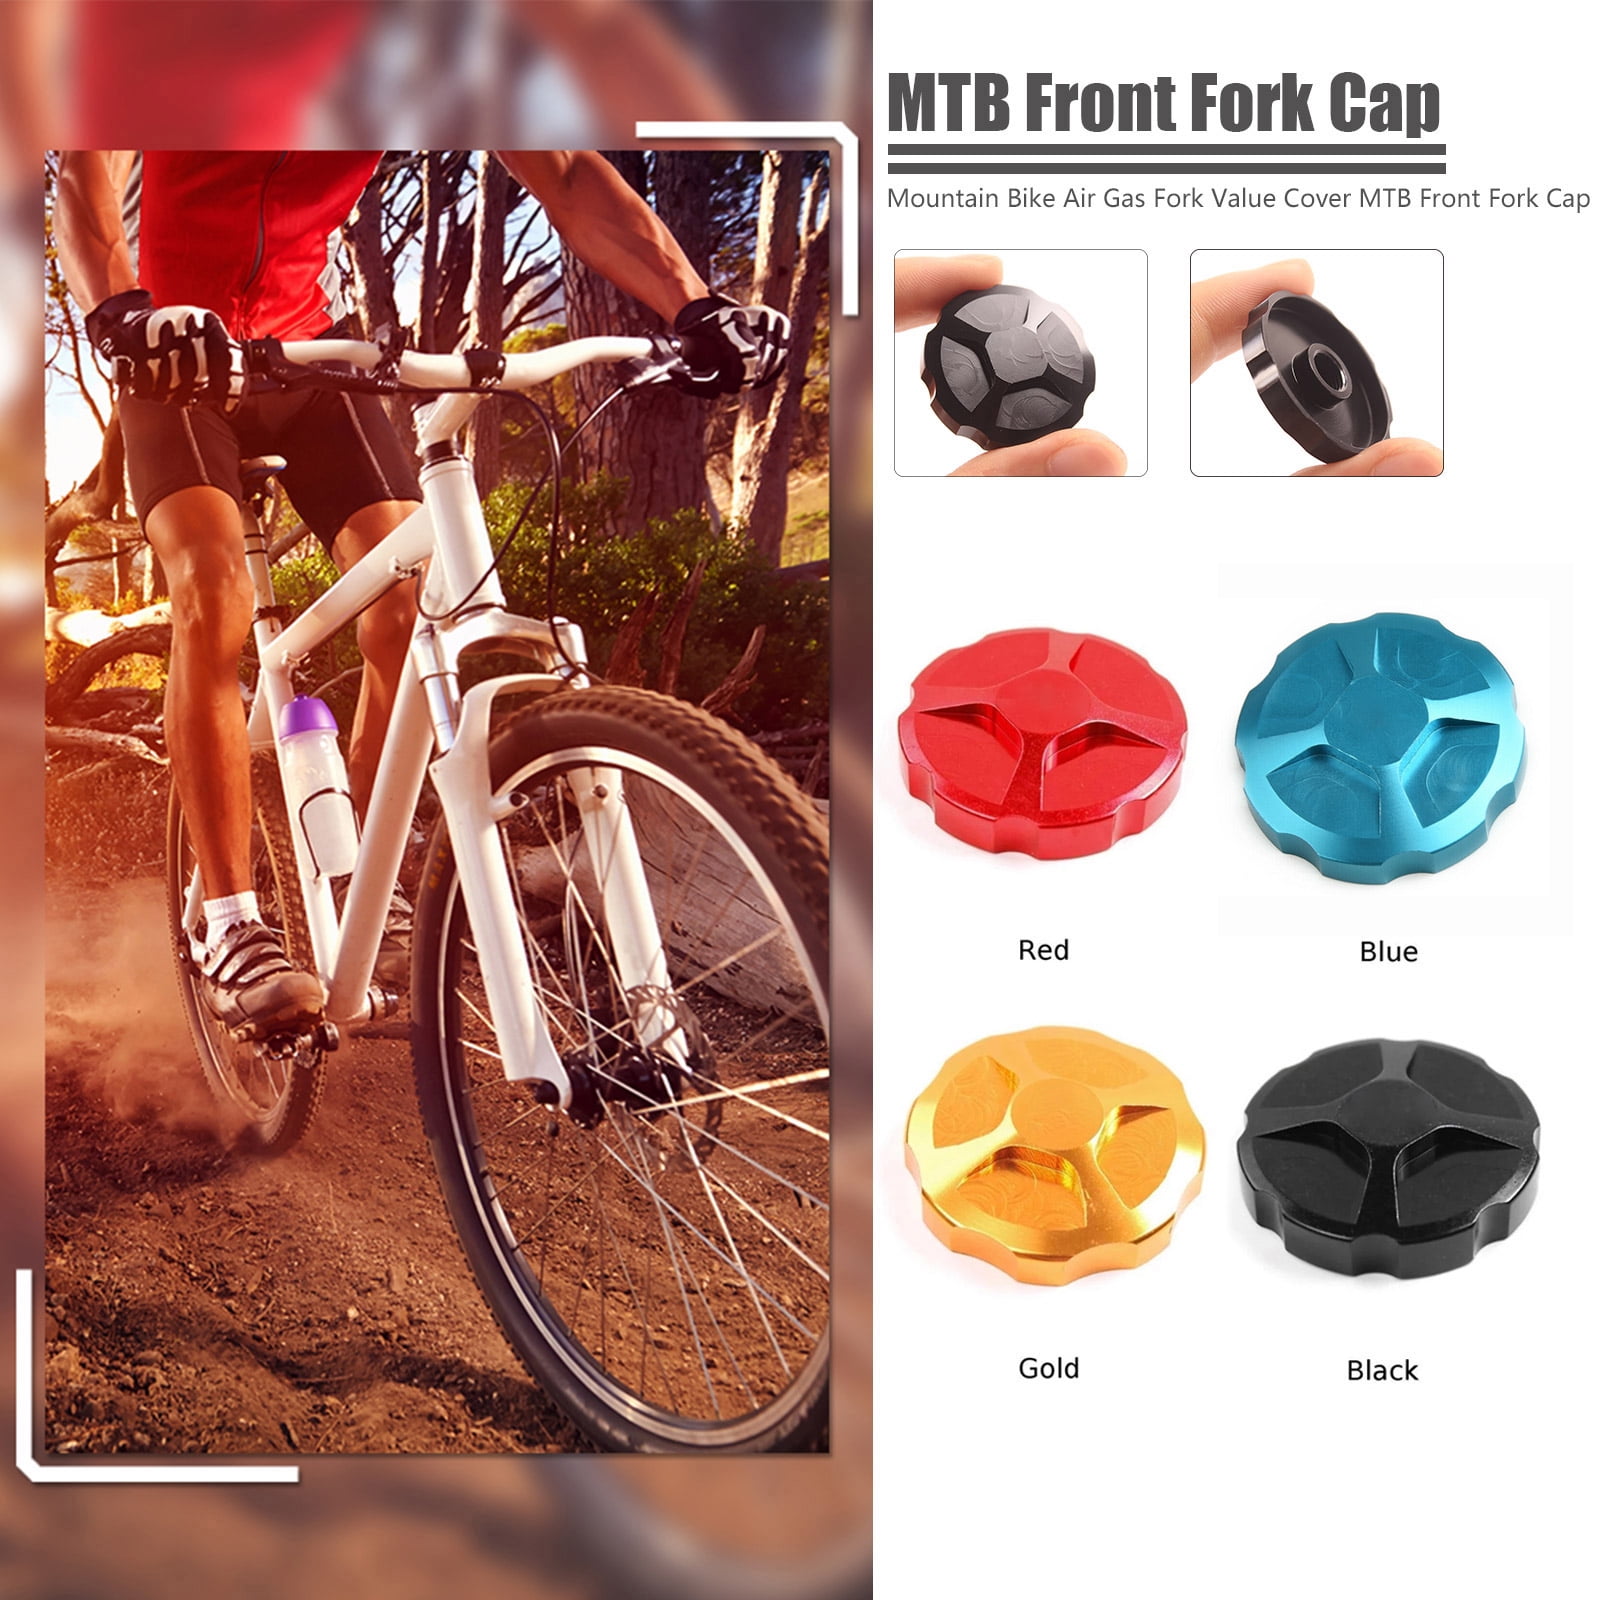 Aluminum Alloy Mountain-Bike Air Gas Fork Value Cover MTB Front Fork Cap Parts 